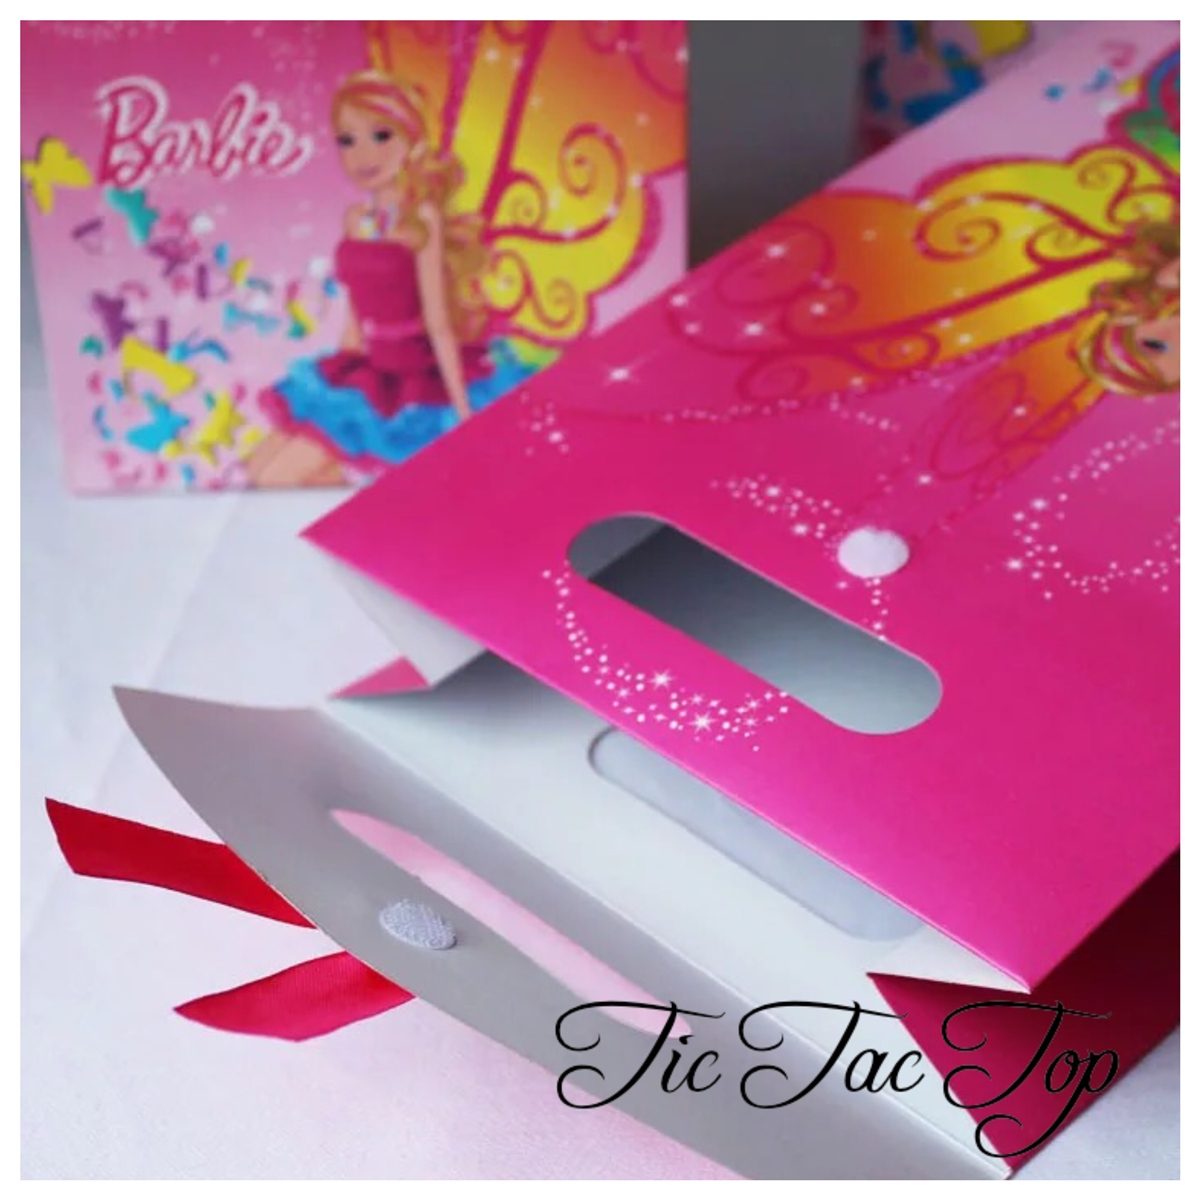 Barbie Doll Paper Gift & Lolly Bag - 6 Bags